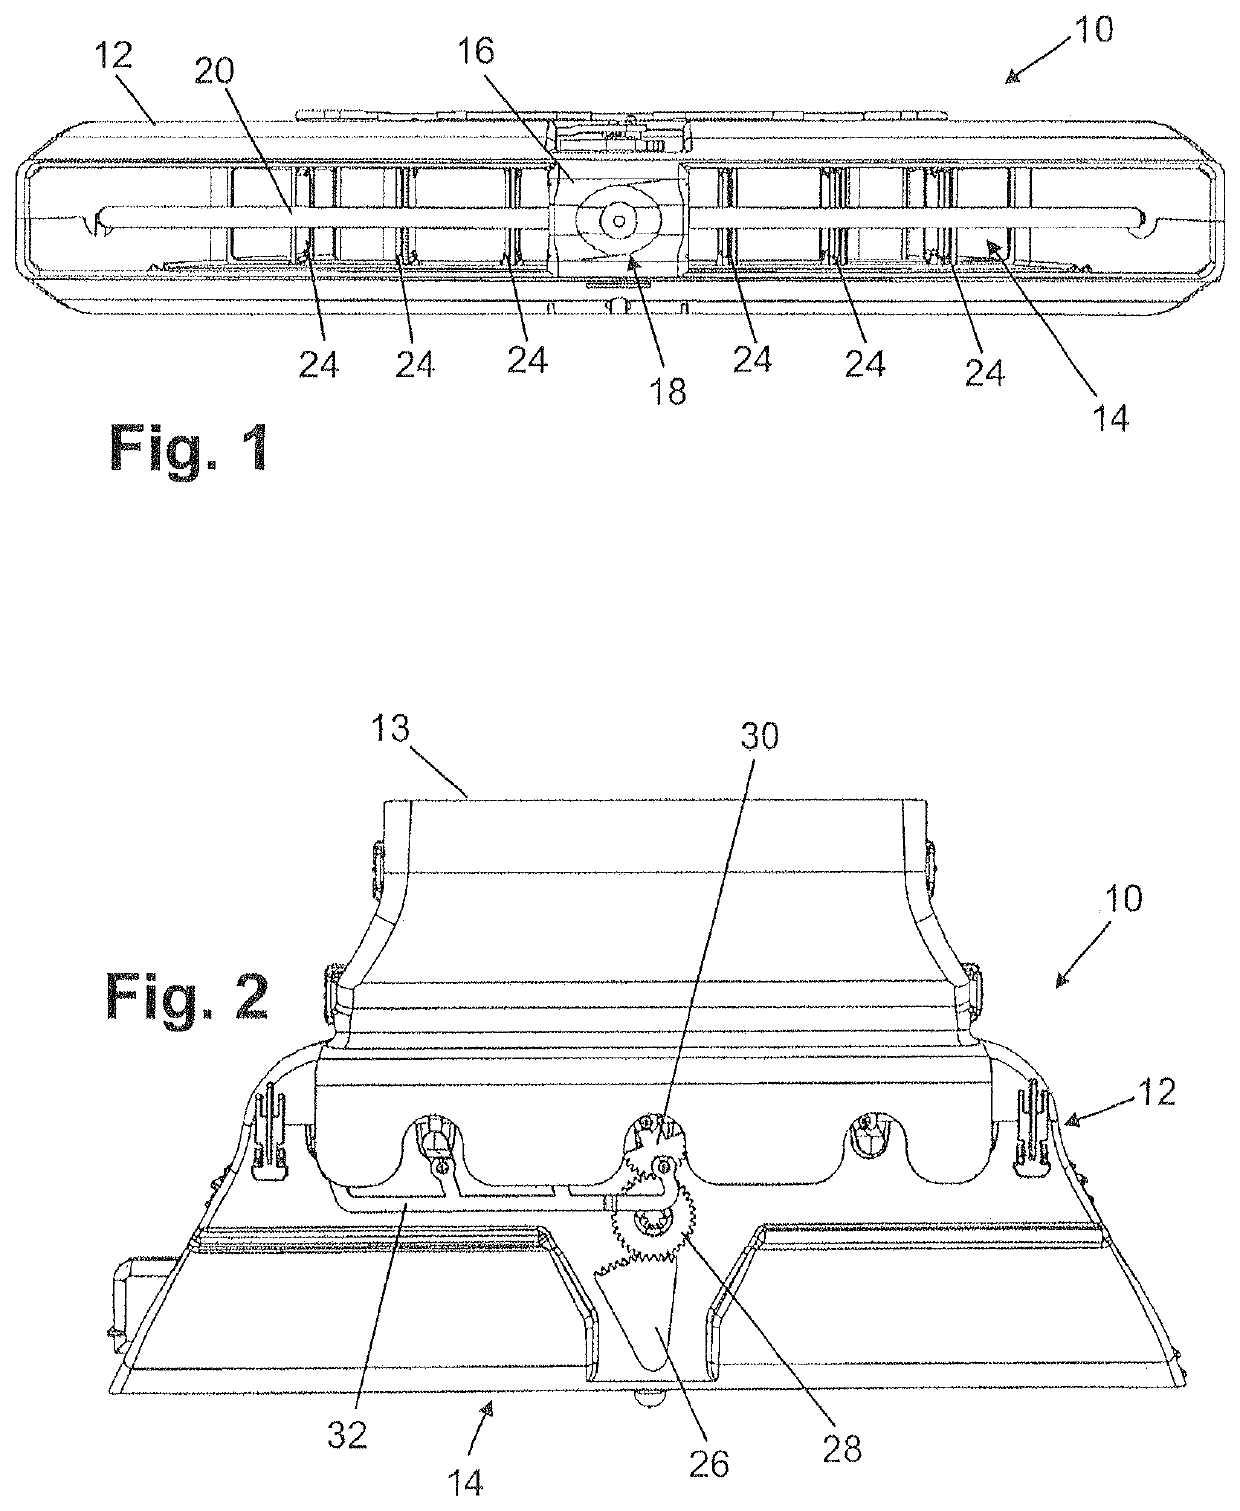 Air vent having a control device